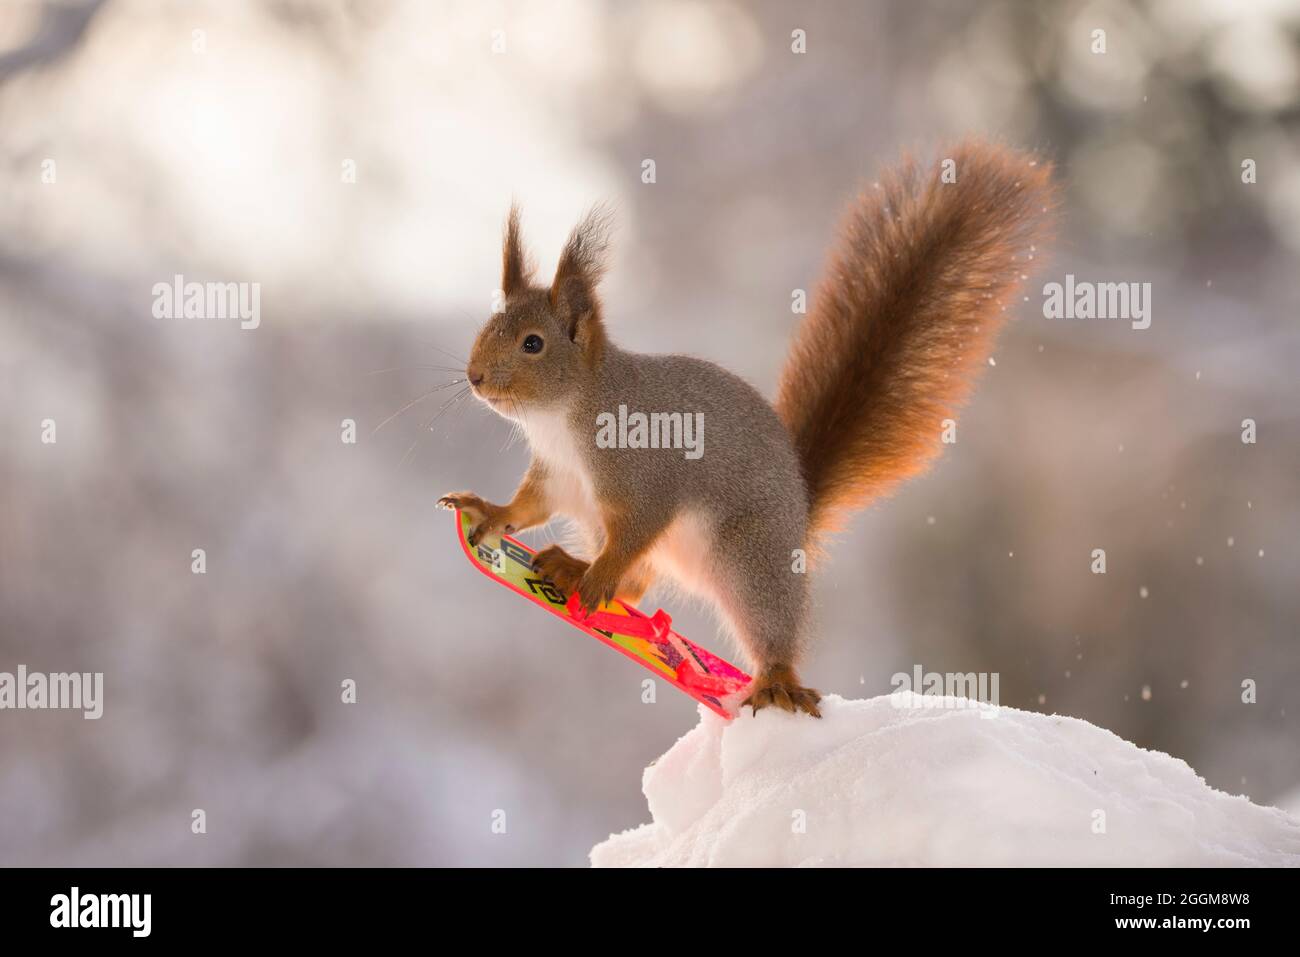 red squirrel with tail up on a Snowboard Stock Photo